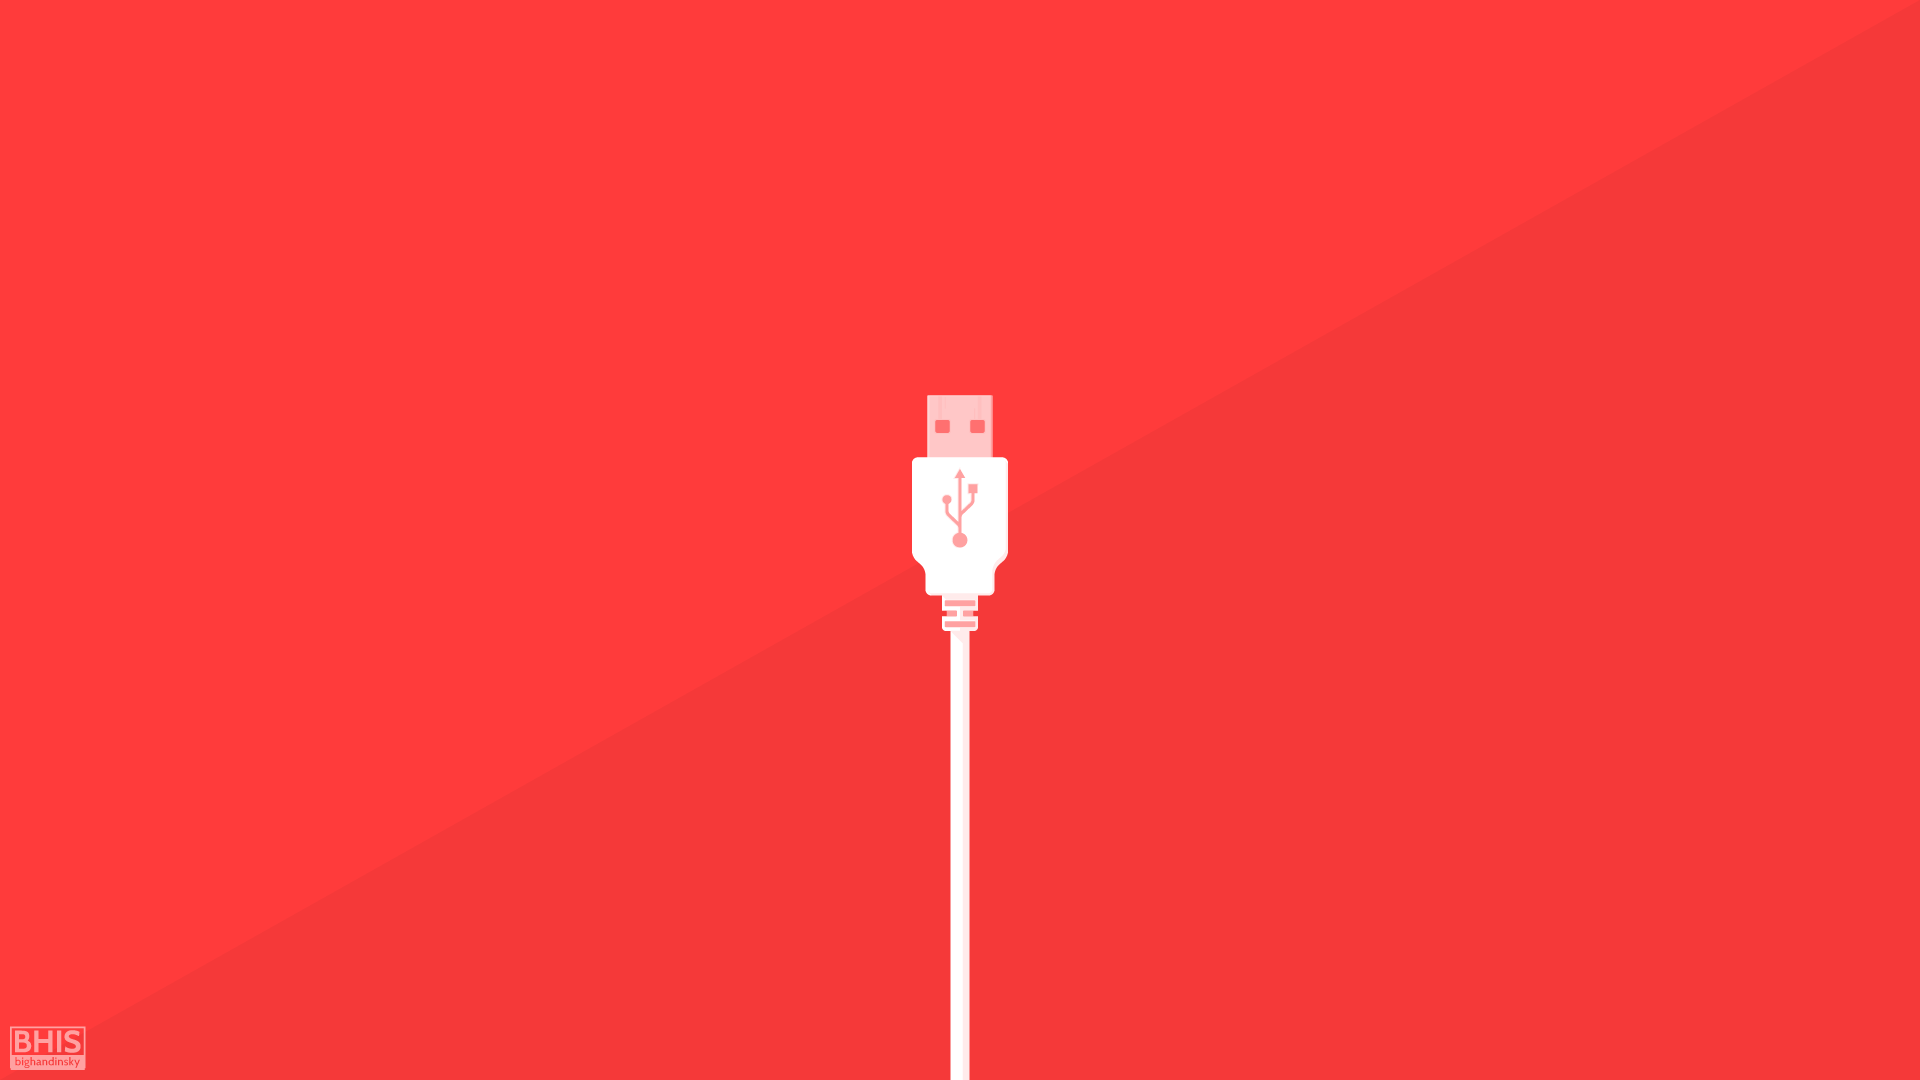 General 1920x1080 USB minimalism red digital art artwork technology red background simple background wires